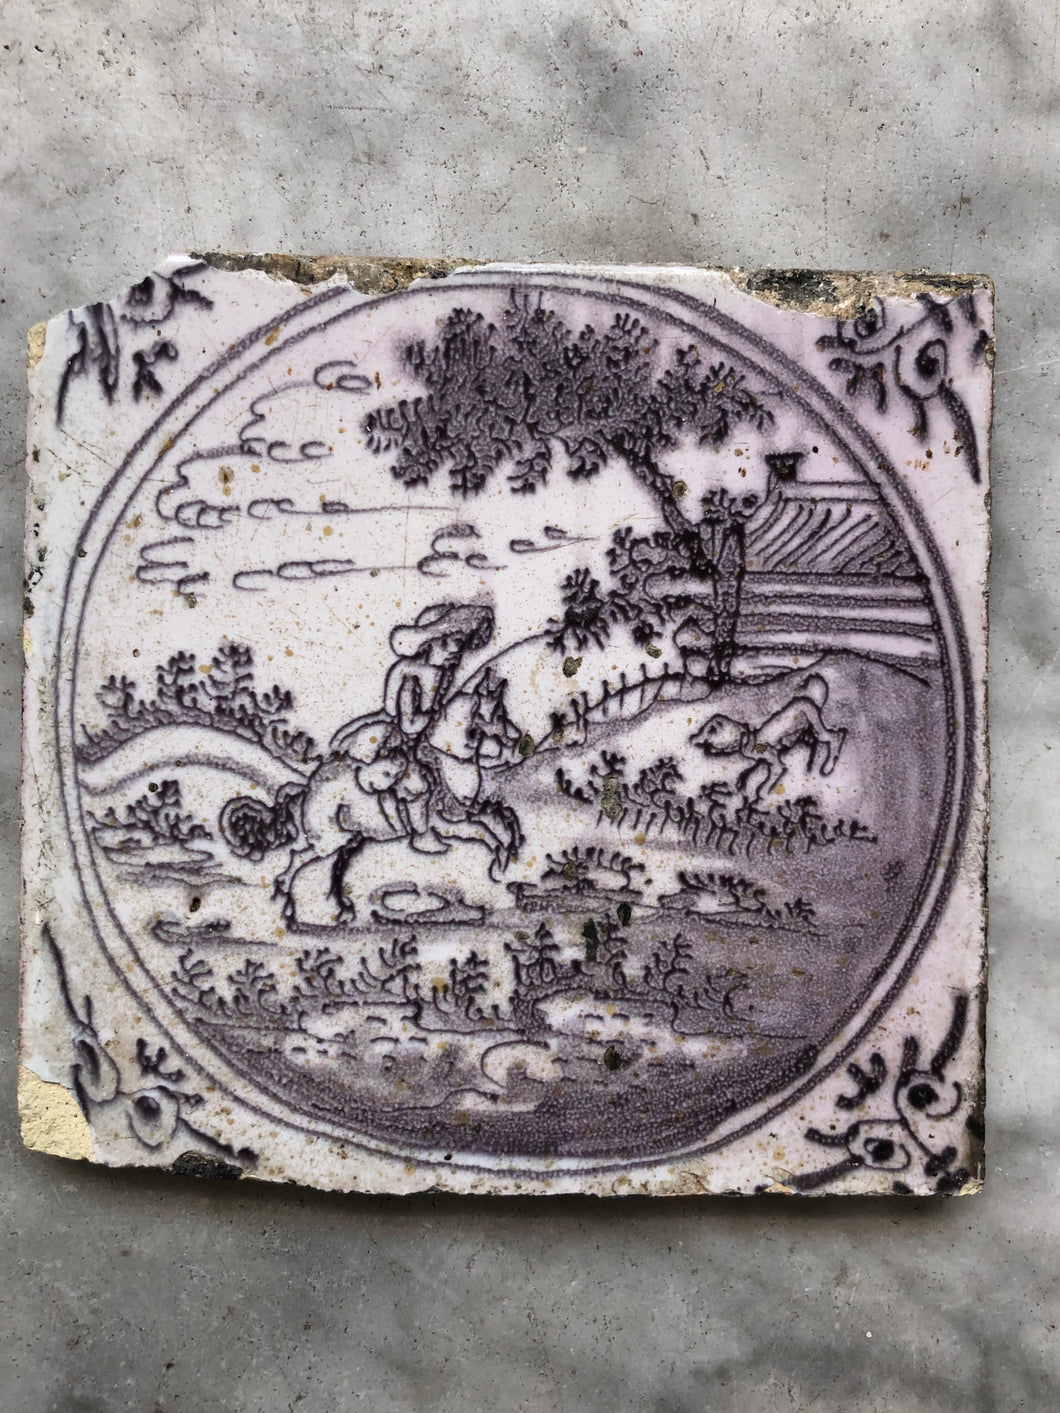 Early 18 th century delft tile with landscape